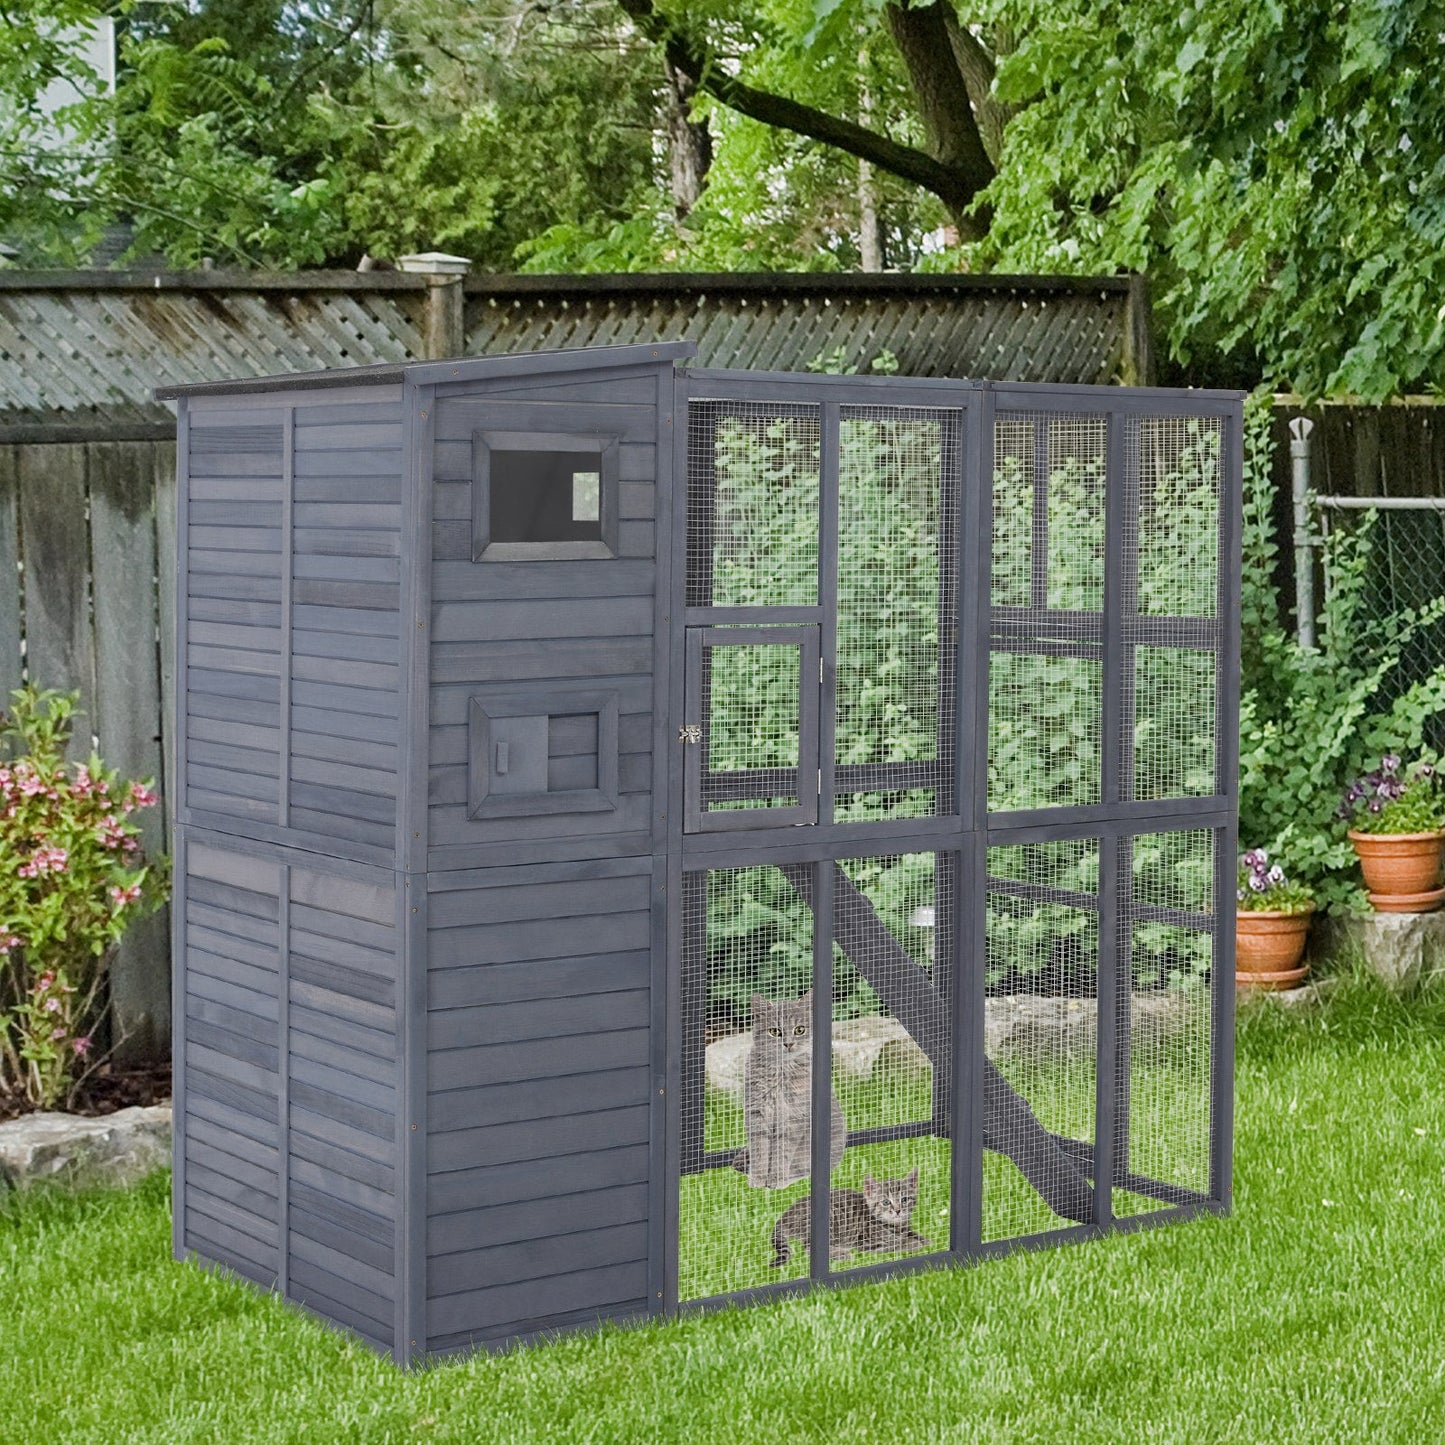 -PawHut Cat House Outdoor Catio Kitty Enclosure with Platforms Run Lockable Doors and Asphalt Roof, 77" x 37" x 69", Grey - Outdoor Style Company